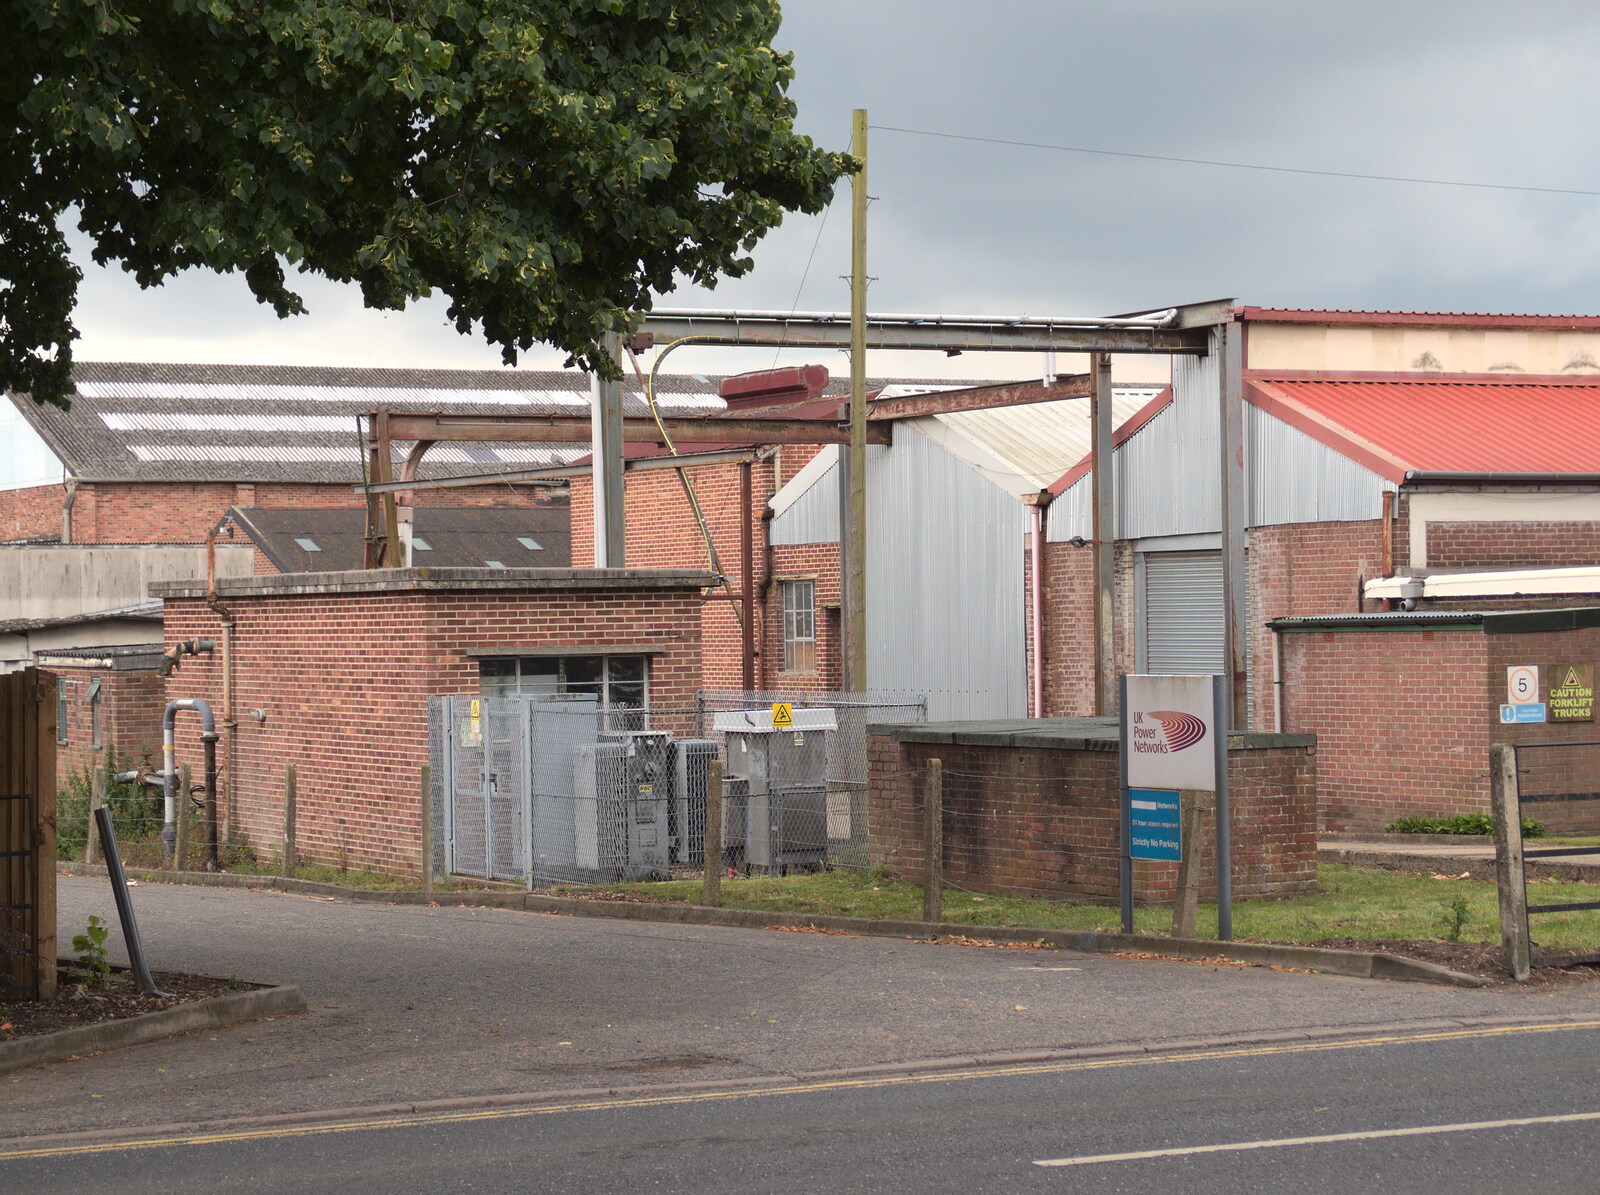 The back of the old Feather Factory from A Busy Day and a Church Fair, Diss, Norfolk - 28th June 2014